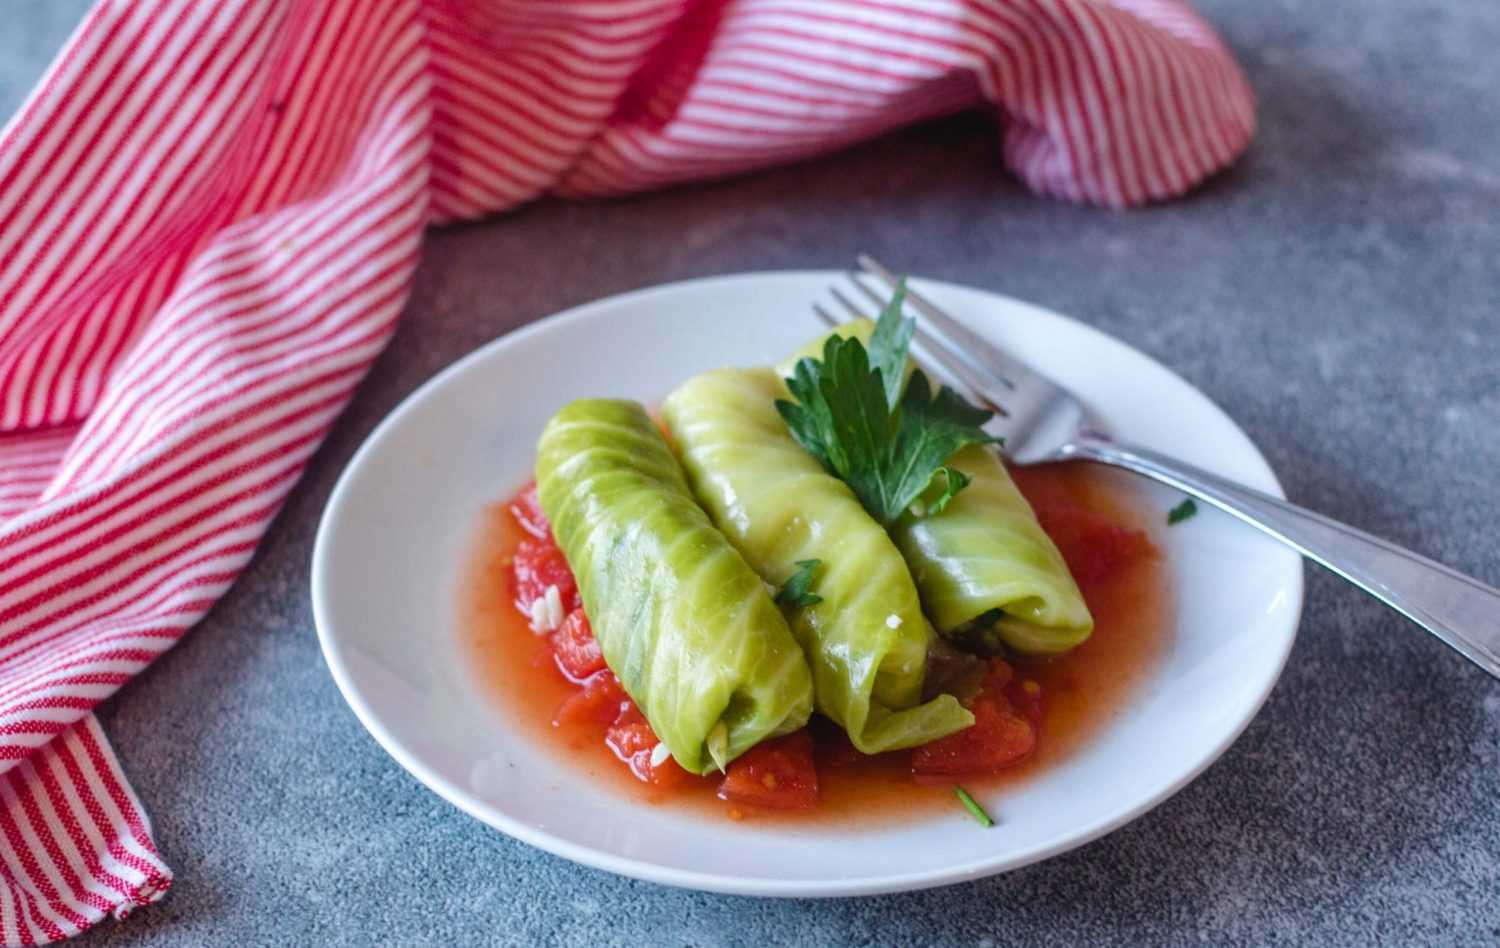 Cabbage rolls in red sauce topped with chopped parsley on white plate